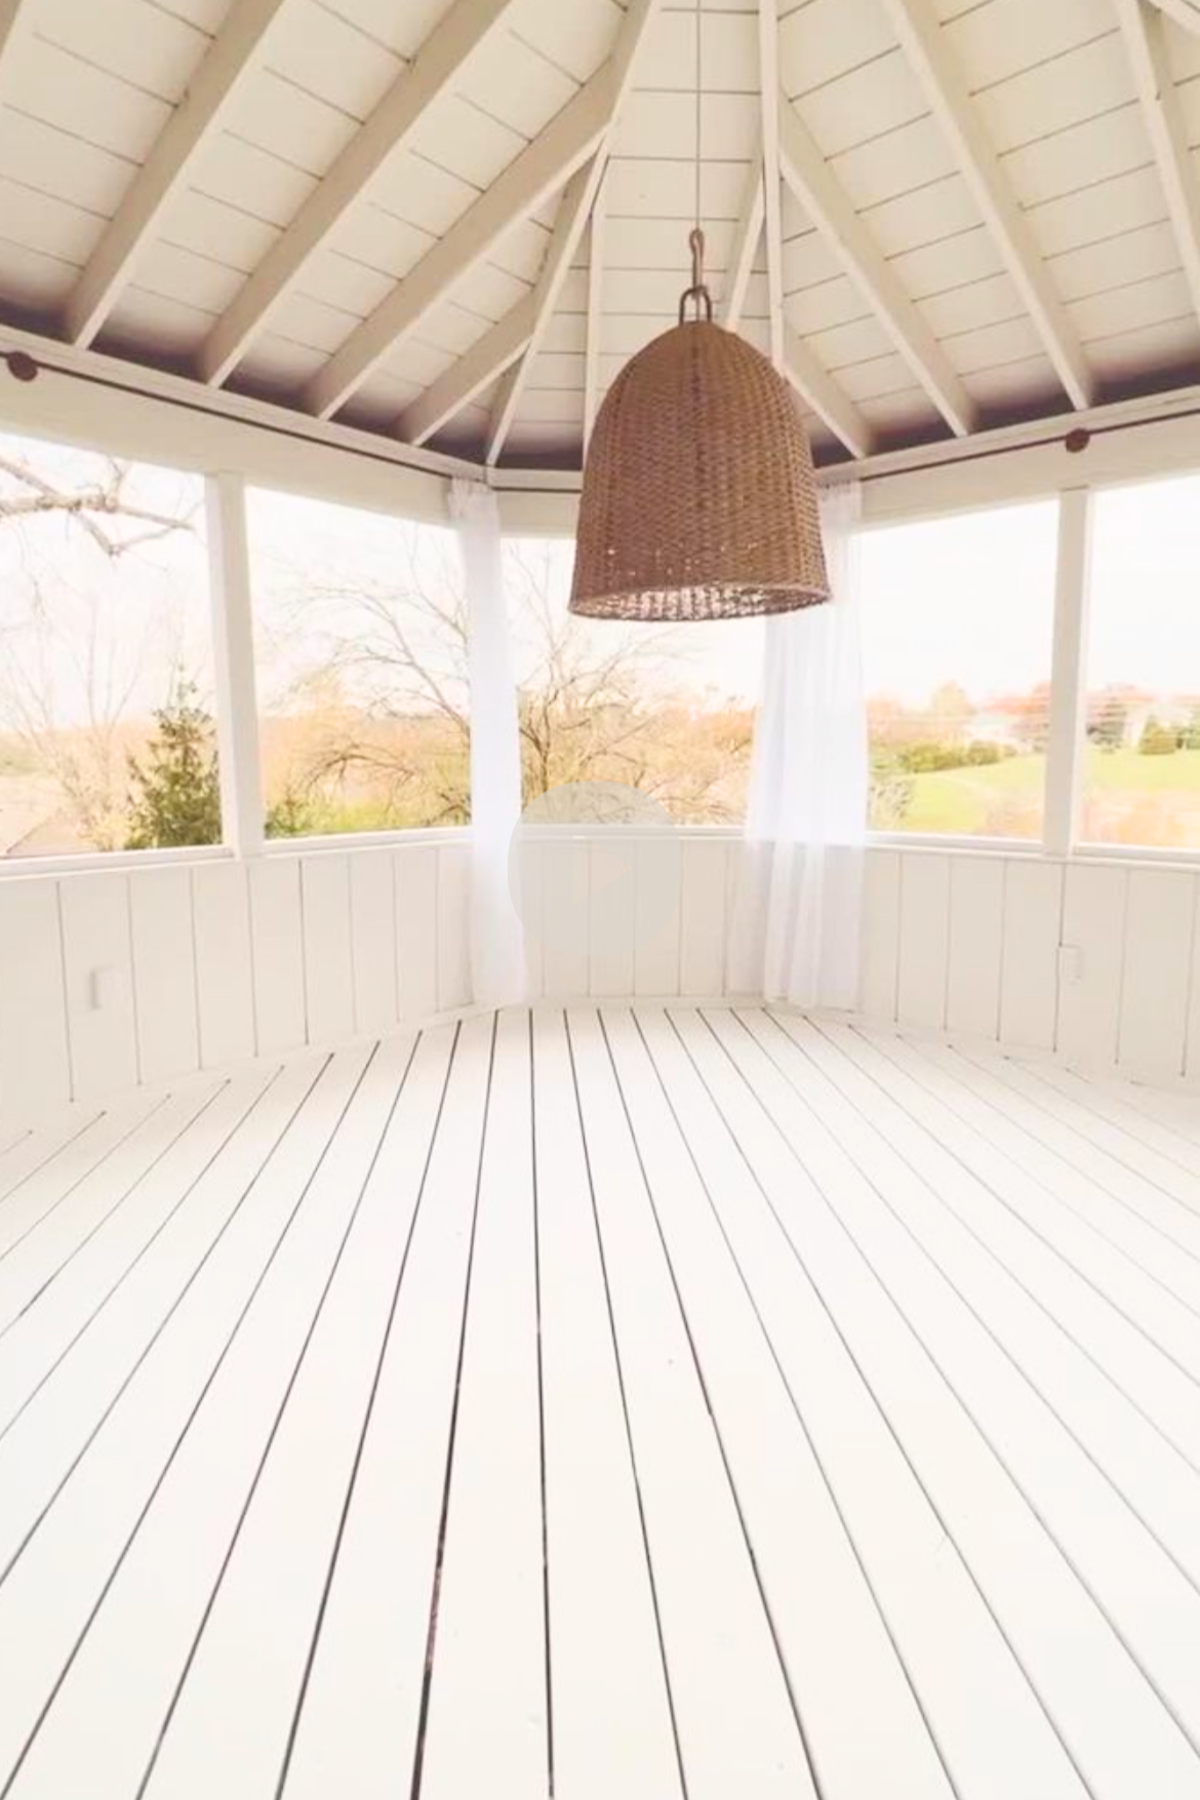 A white, wooden gazebo with a wicker hanging light fixture, open windows, and white floorboards that gleam as if treated with the best deck paint, overlooking a grassy landscape.